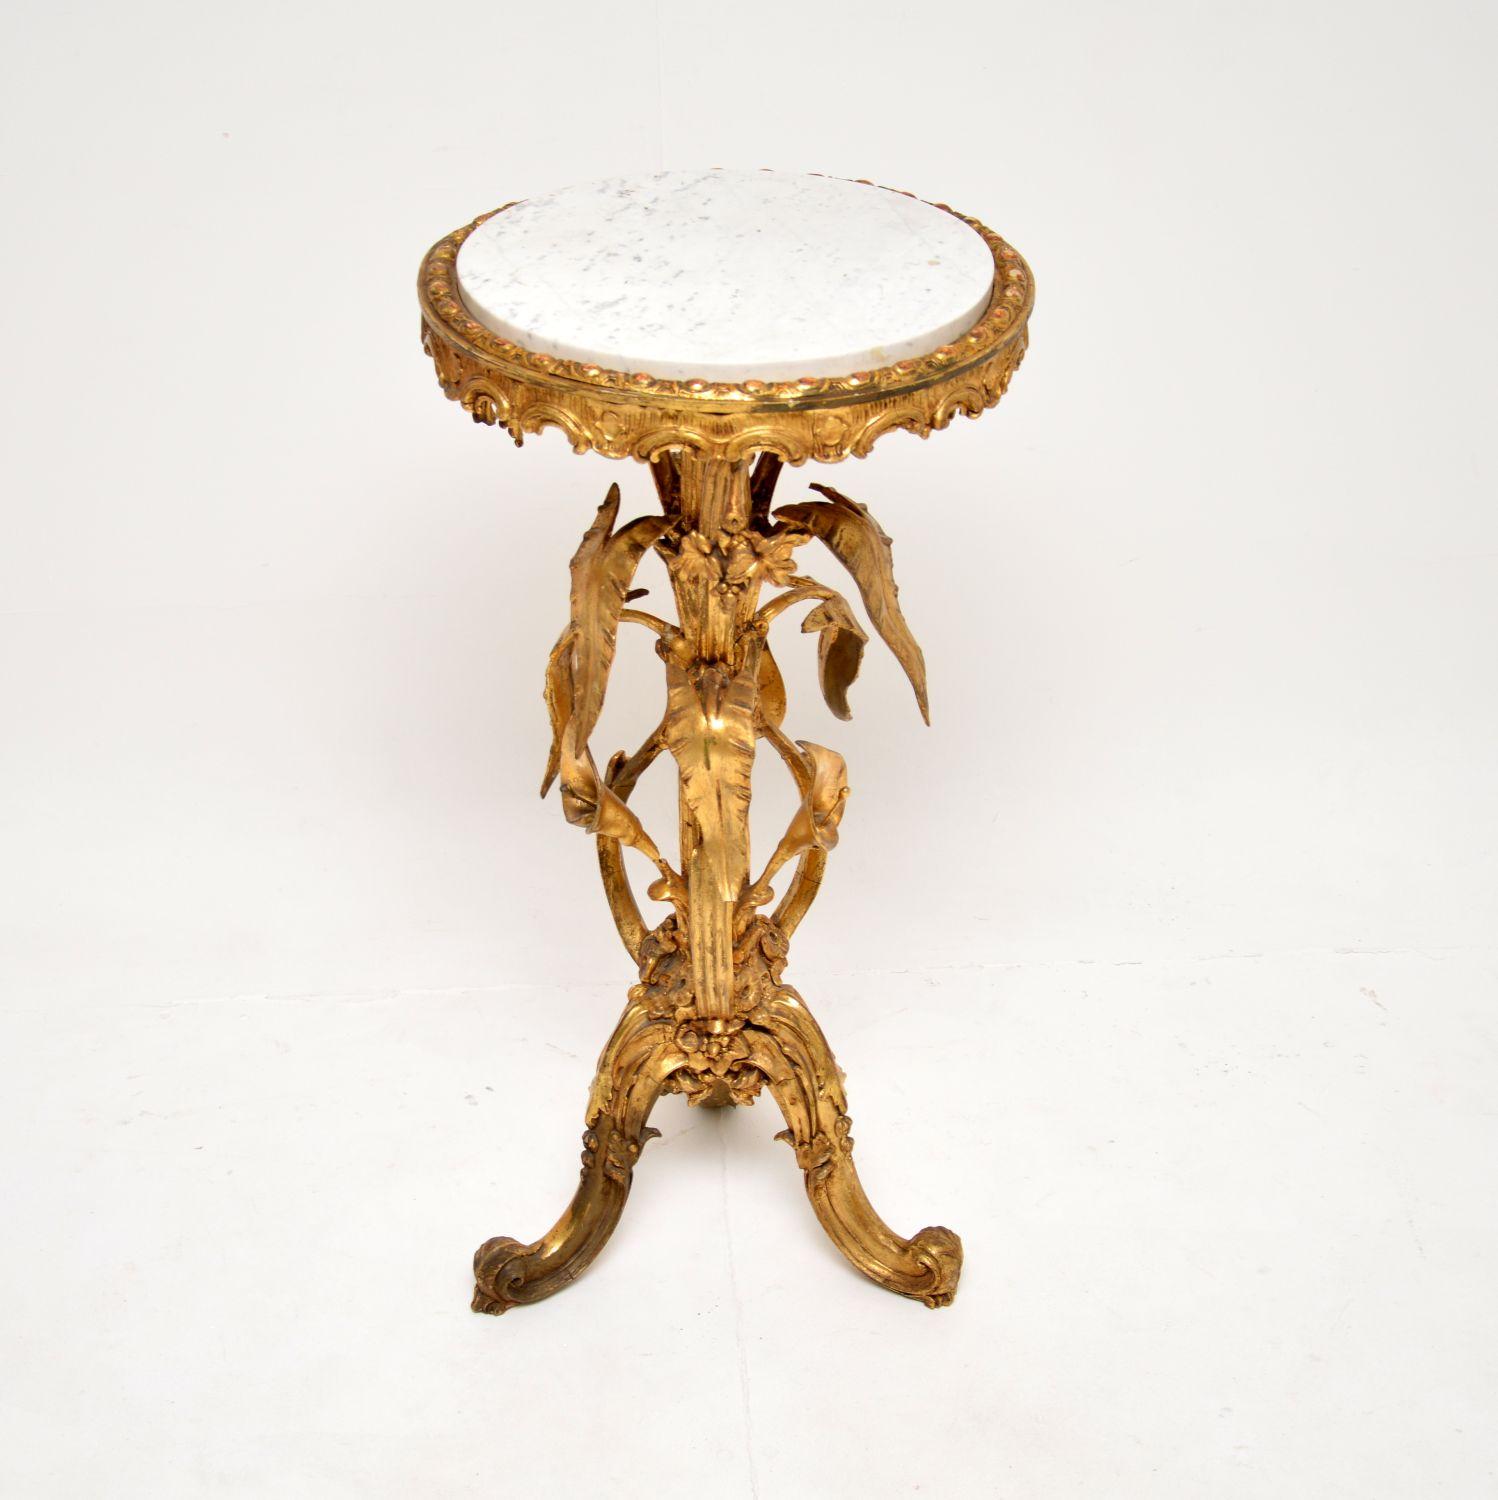 A magnificent and very early antique marble top gilt wood occasional side table. We think this was made in France, and would date it from around the 1820-1840’s, but it’s very difficult to date exactly, because it’s so unique.

It is of amazing